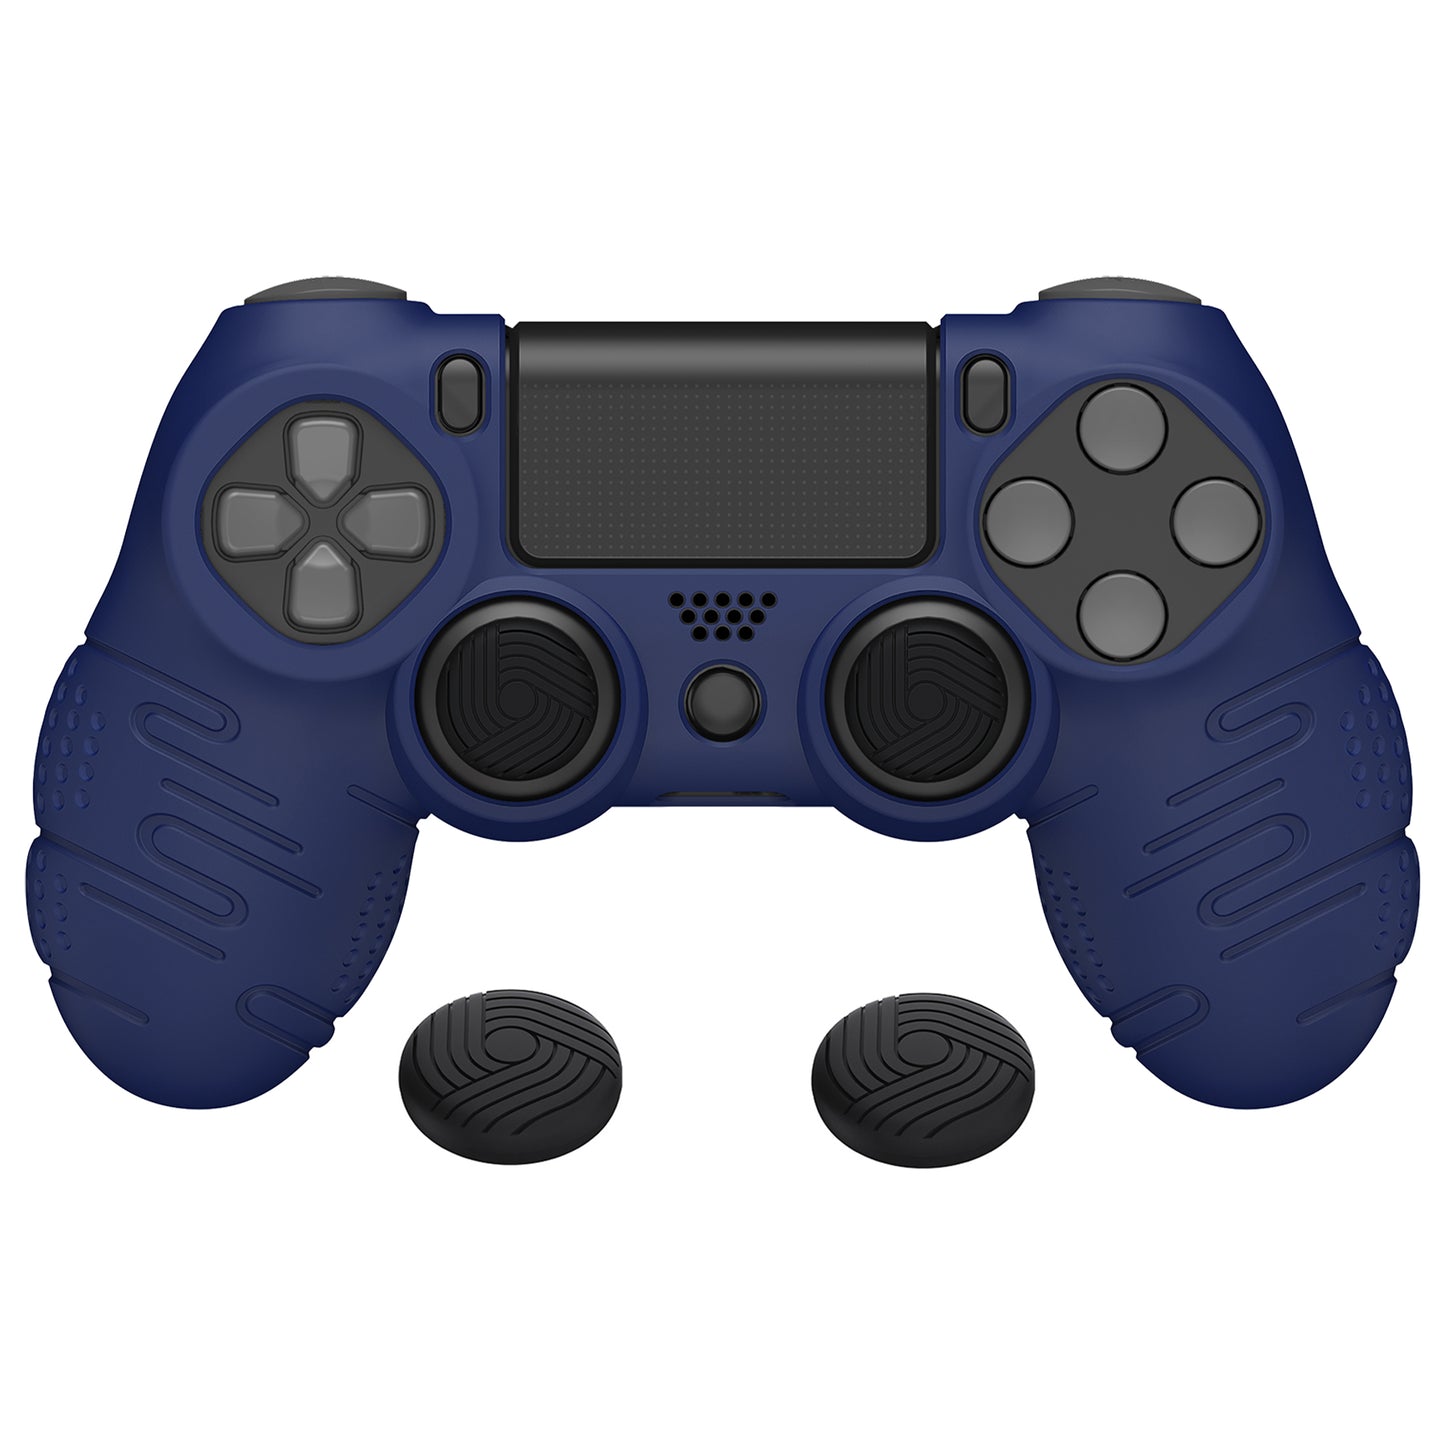 PlayVital Line & Dot Navy Blue Silicone Cover Skin for ps4 Controller, Anti-Slip Soft Protector Case Cover with Thumb Grip Caps for ps4 for ps4 Slim for ps4 Pro Controller - CLRP4P005